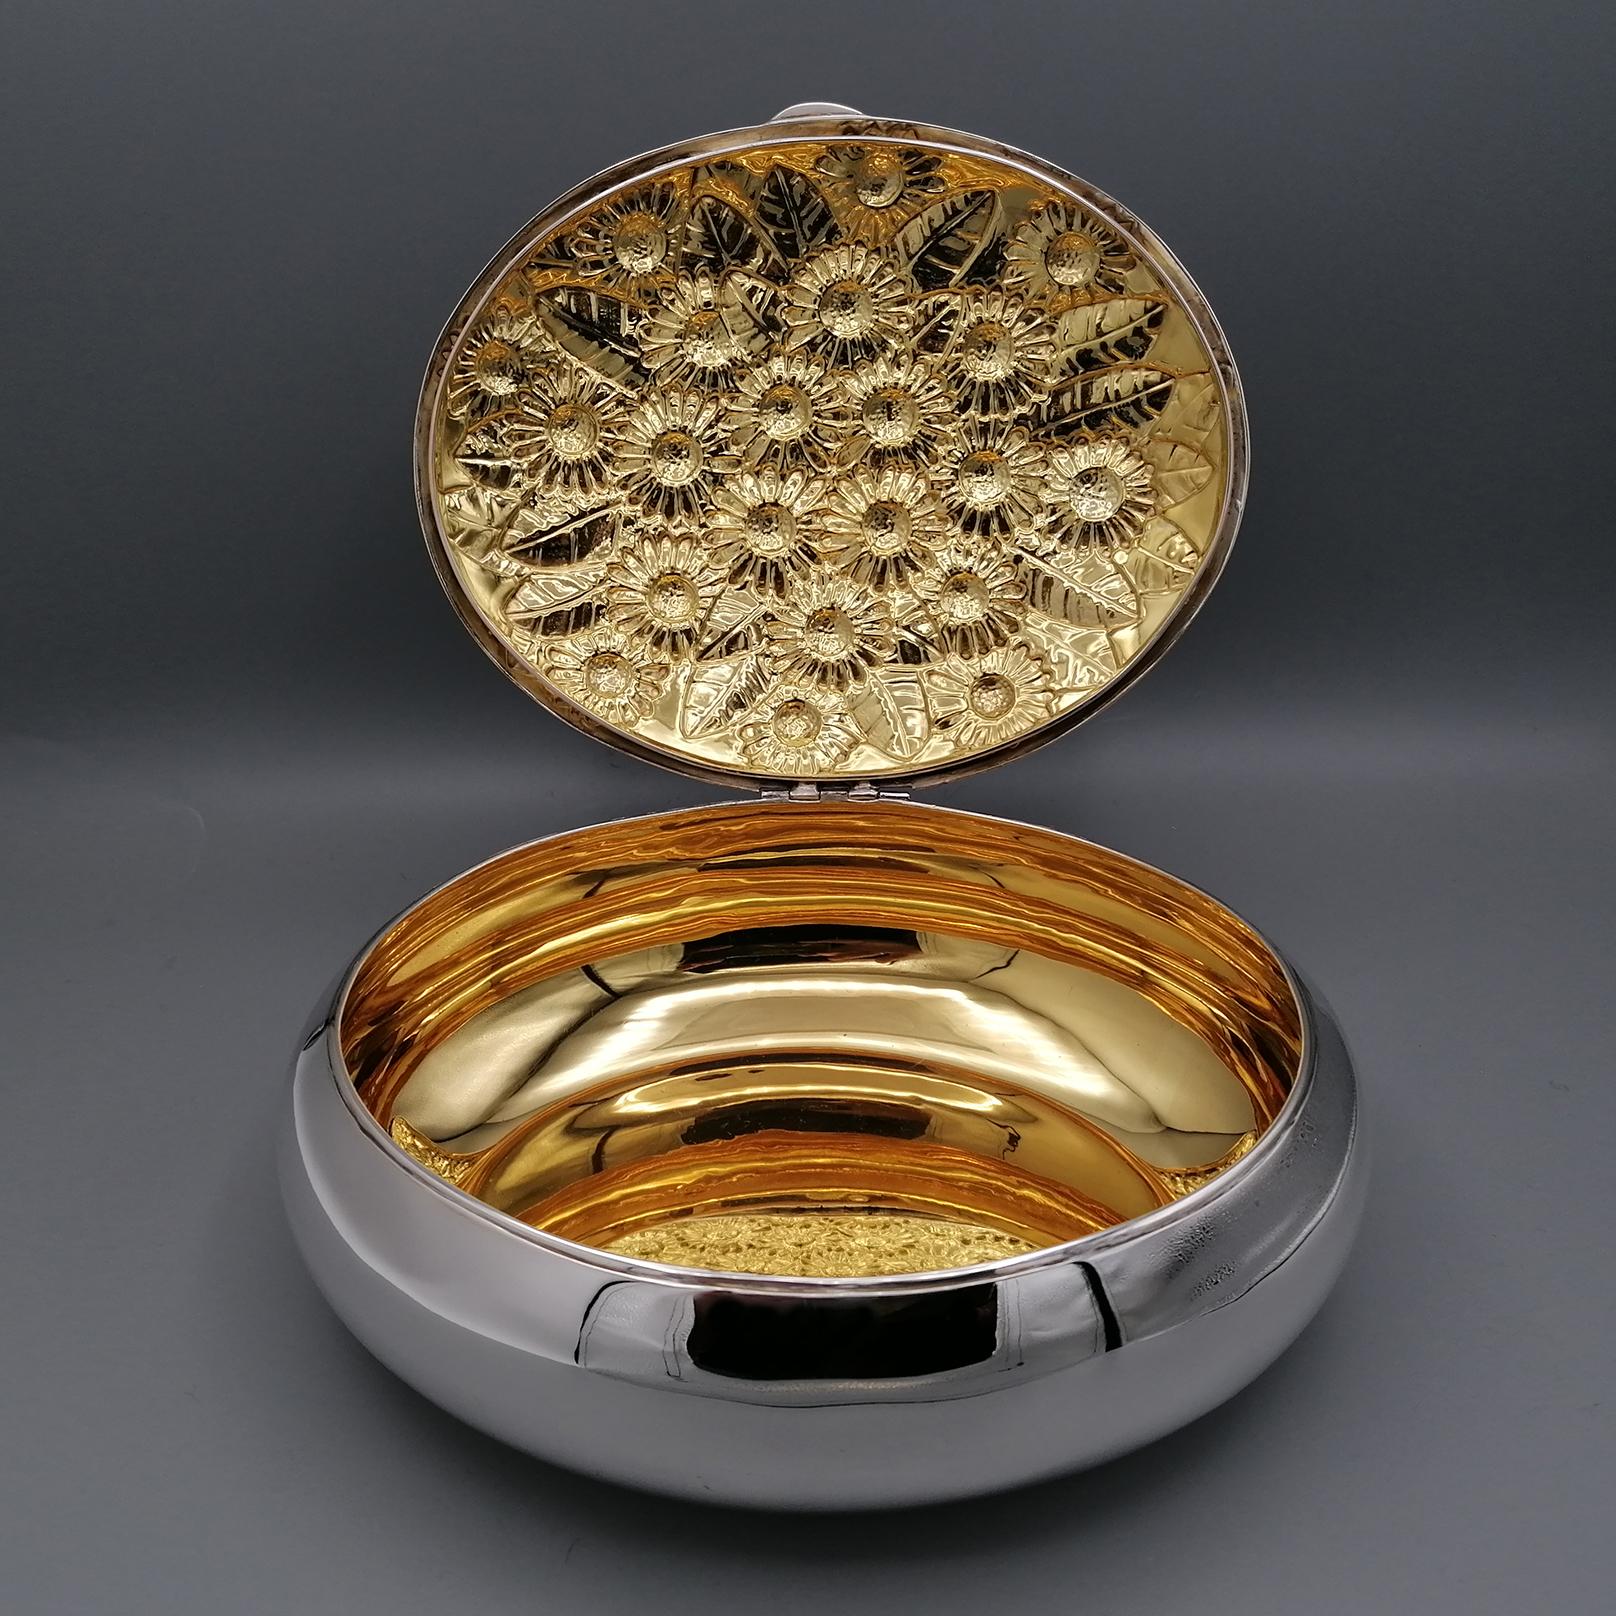 Oval box in solid 800 silver with embossed daisies and 24kt golden interior.
This box was made entirely by hand giving it an oval shape.
The lid, finely embossed with flower motifs and specifically daisies, was hinged creating a single piece